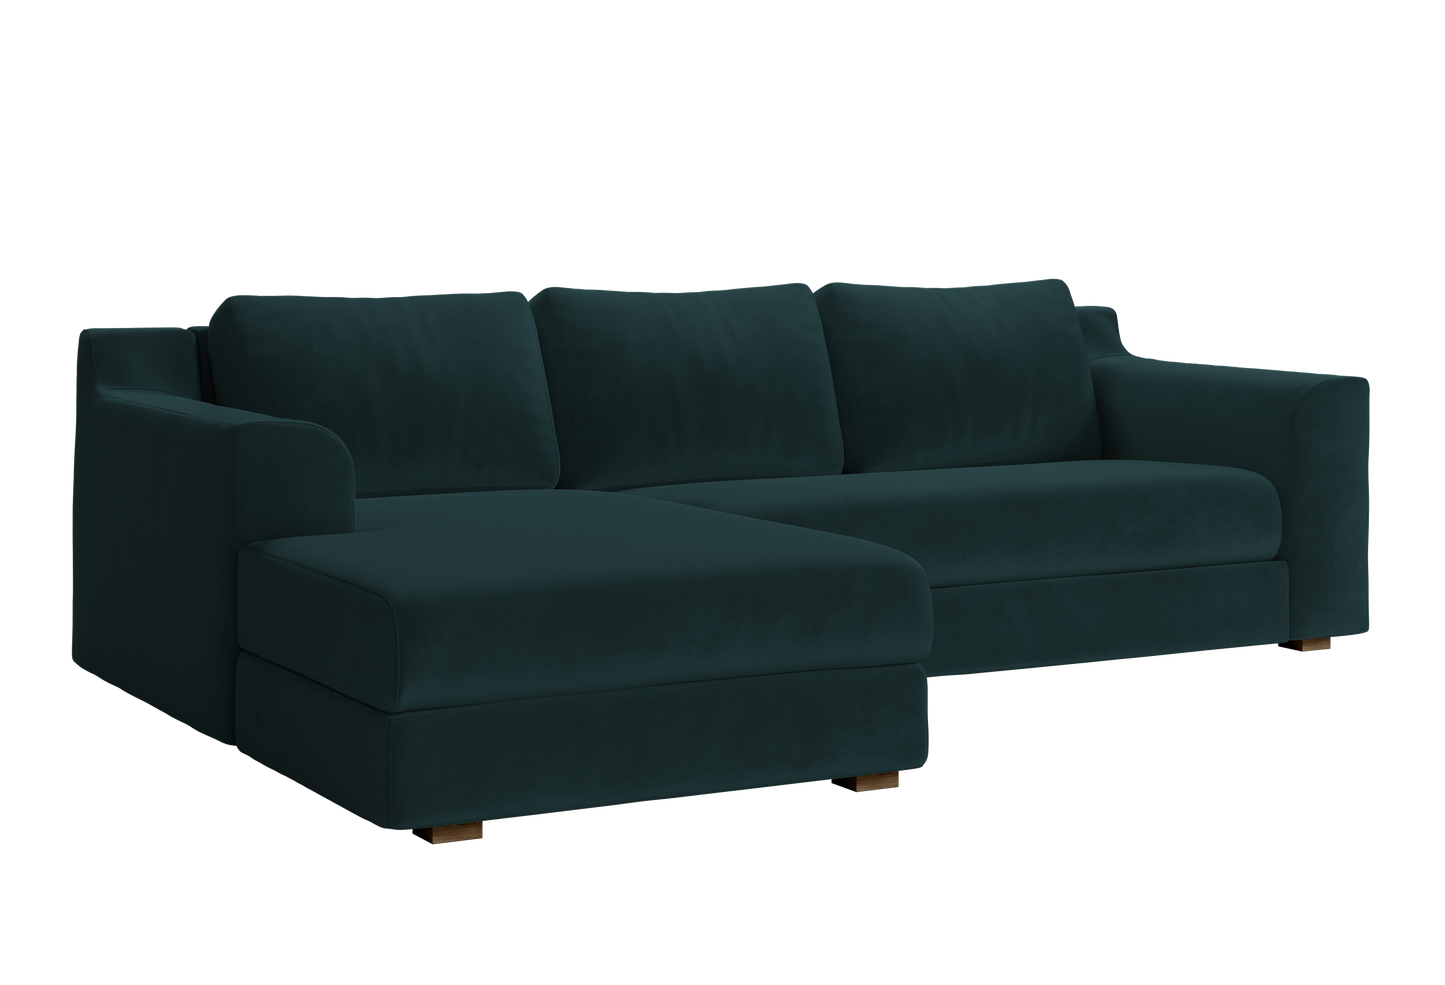 The Elevate Sectional Sofa